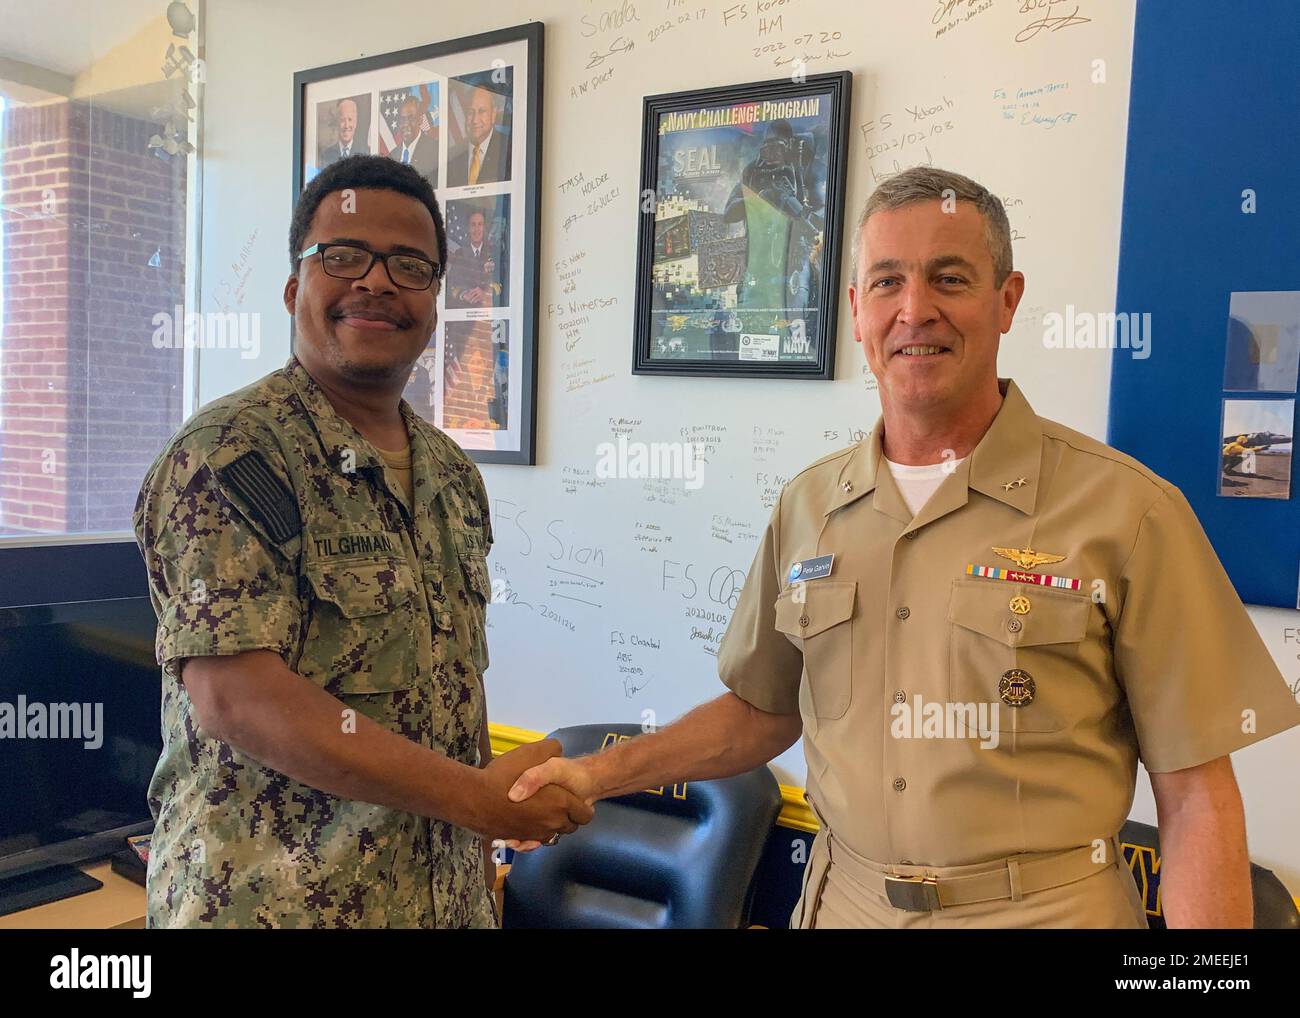 220816-N-N0443-1003 WOODBRIDGE, Va. (Aug. 16, 2022) Fire Controlman 2nd Class Marvin Tilghman, left, poses for a photo with Rear Adm. Pete Garvin, commander, Naval Education and Training Command (NETC), at Navy Recruiting Station Woodbridge, Virginia, Aug. 16, 2022.  Garvin visited the recruiting station to talk with recruiters about their mission to inform, attract, influence and hire the highest quality candidates from America's diverse talent pool. As the owner of the Force Development pillar within MyNavy HR, NETC recruits, trains and delivers those who serve the nation, taking them from ' Stock Photo